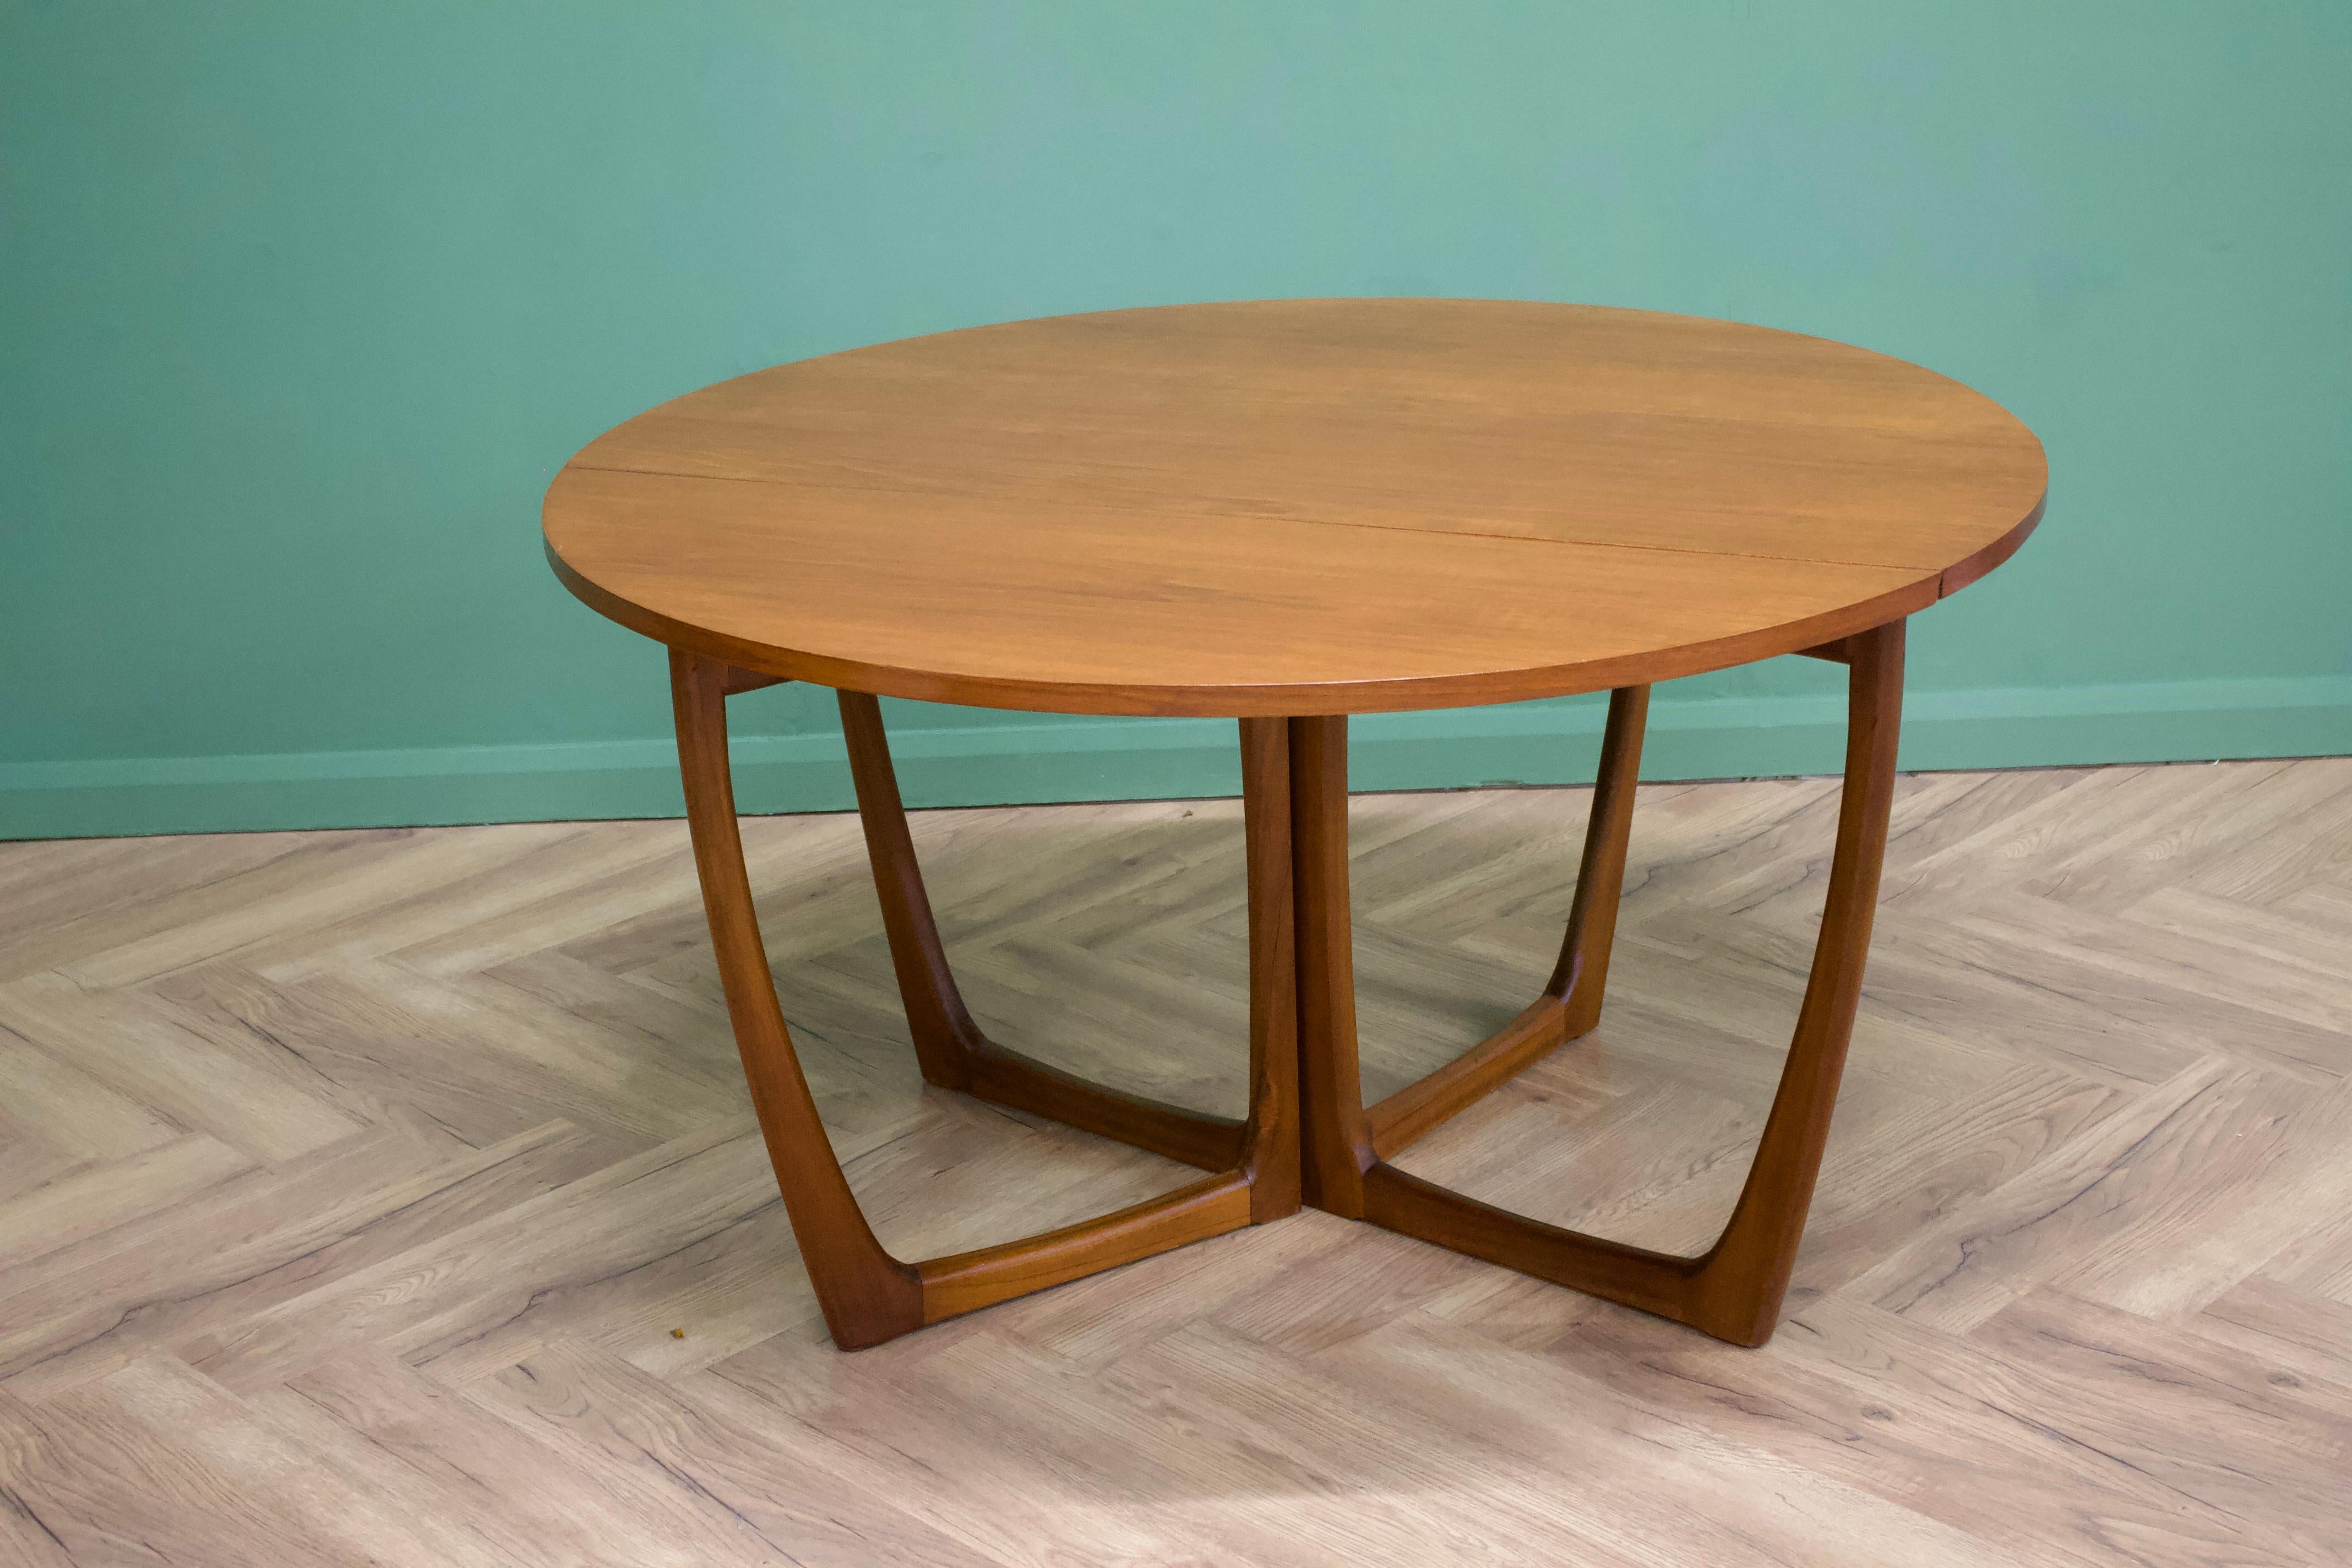 - Mid century drop leaf dining table 
- Made in the UK by Beithcraft
- Made from teak and teak veneer
- Extended width 132 cm.